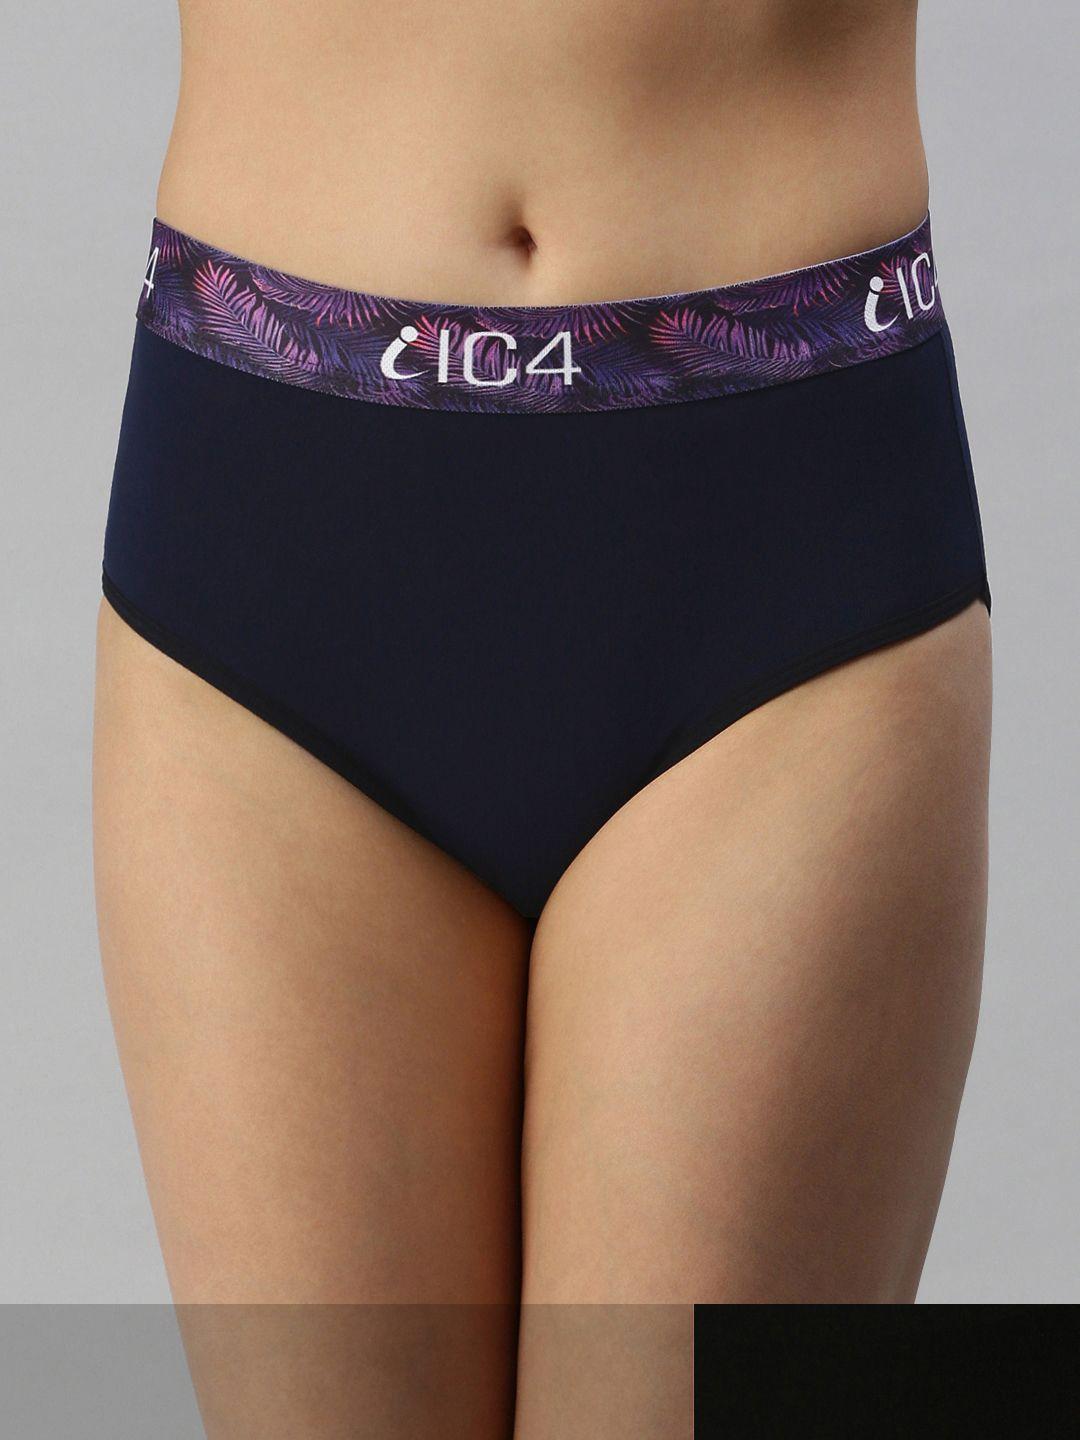 ic4 women navy blue & black solid pack of 2 hipster briefs- 0b-n-1011p2